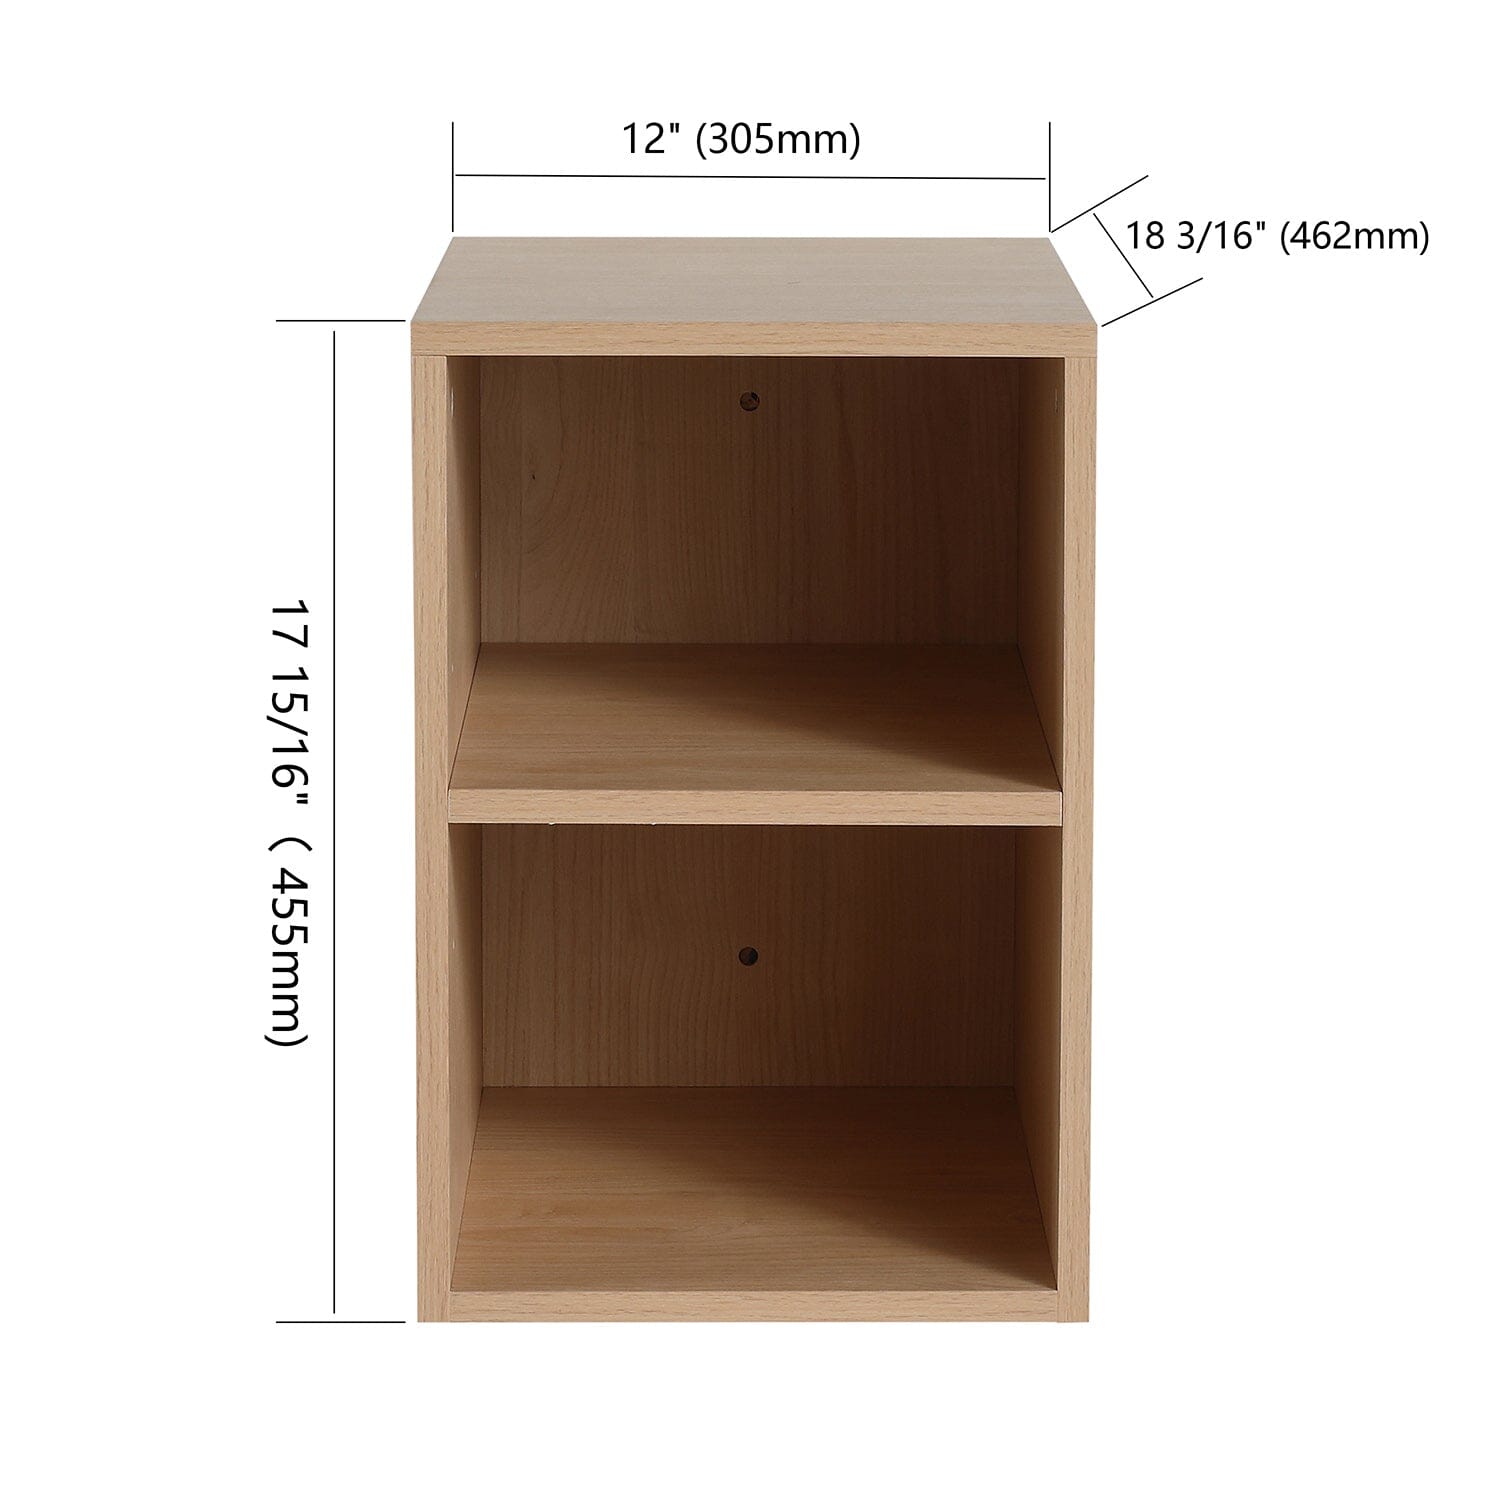 Giving Tree 12 Inch Double Layer Small Wall Mounted Storage Shelves for Small Bathroom